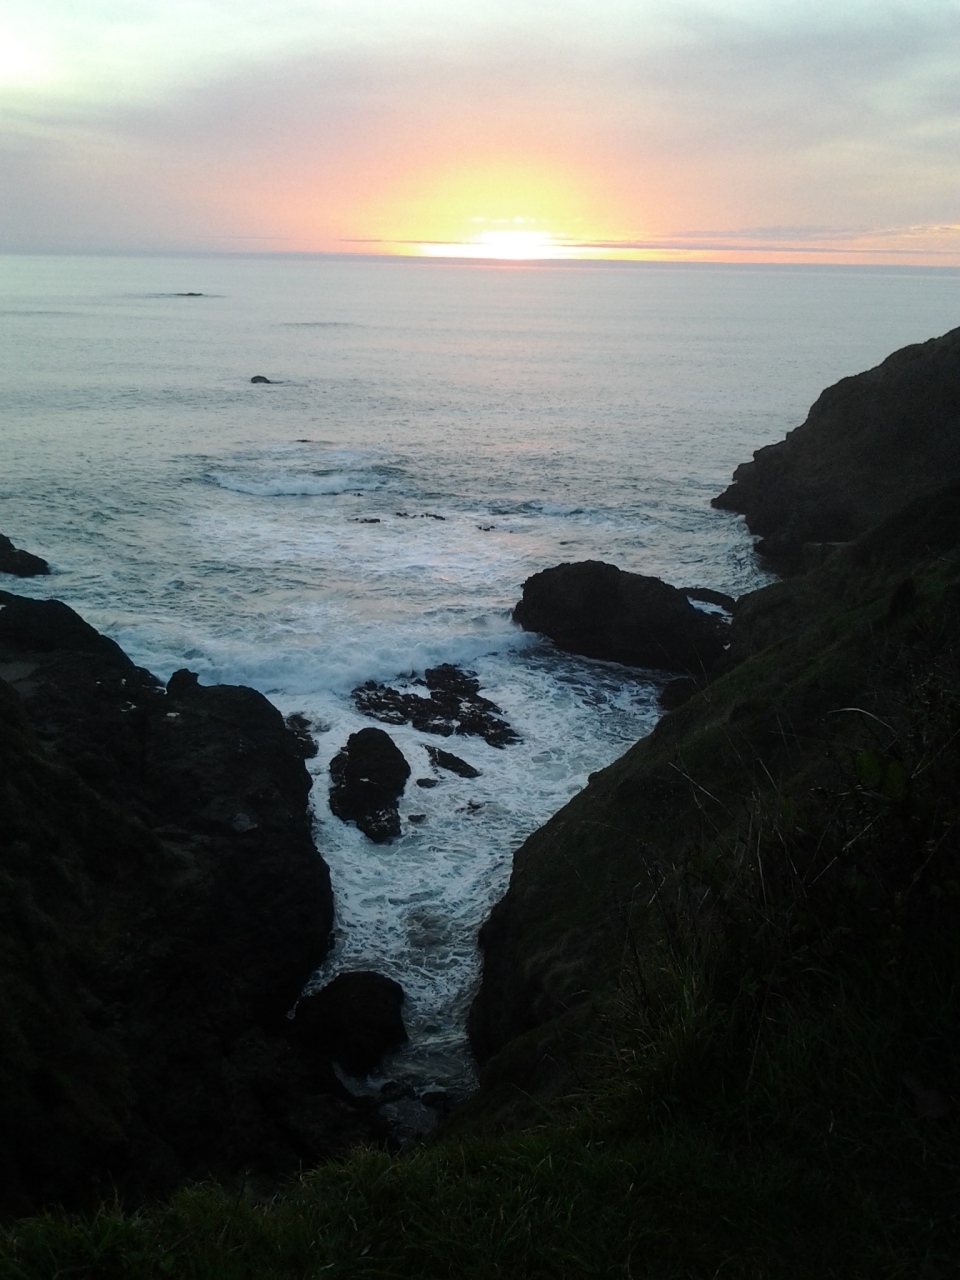  sunset over the pacific, rocks in the foreground